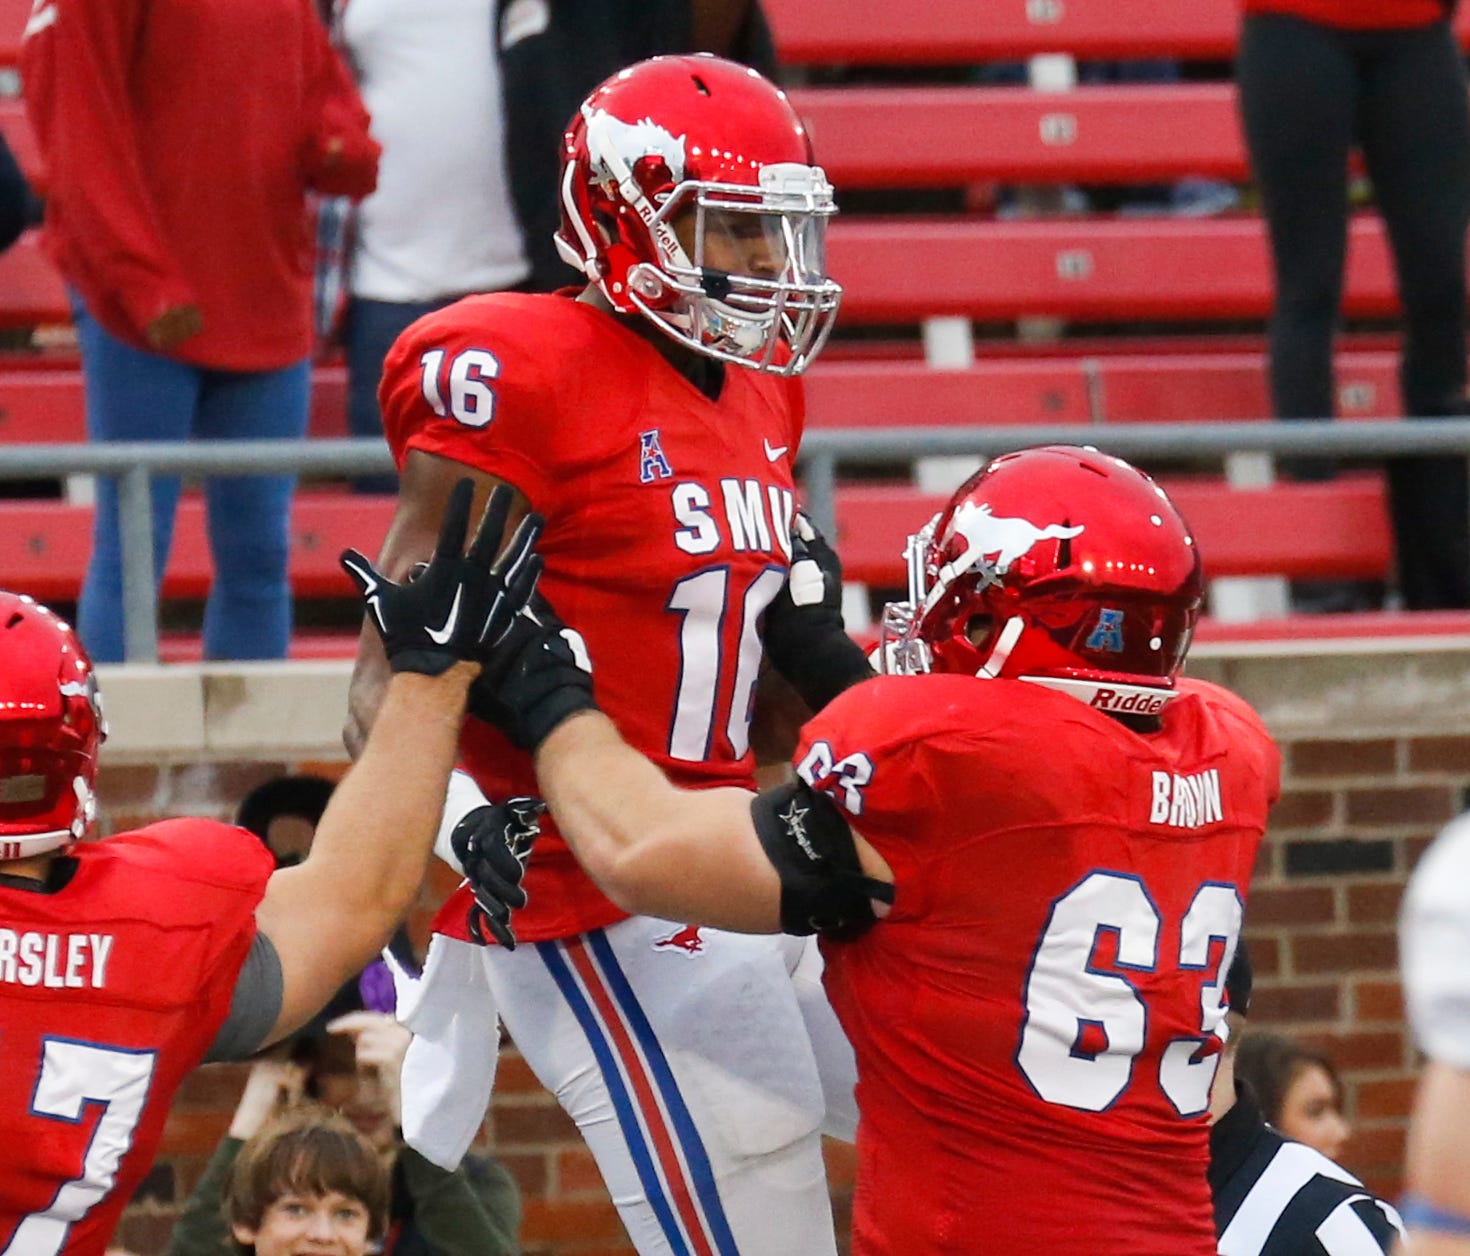 SMU got some help from the local fire department when it wanted to simulate adverse playing conditions.